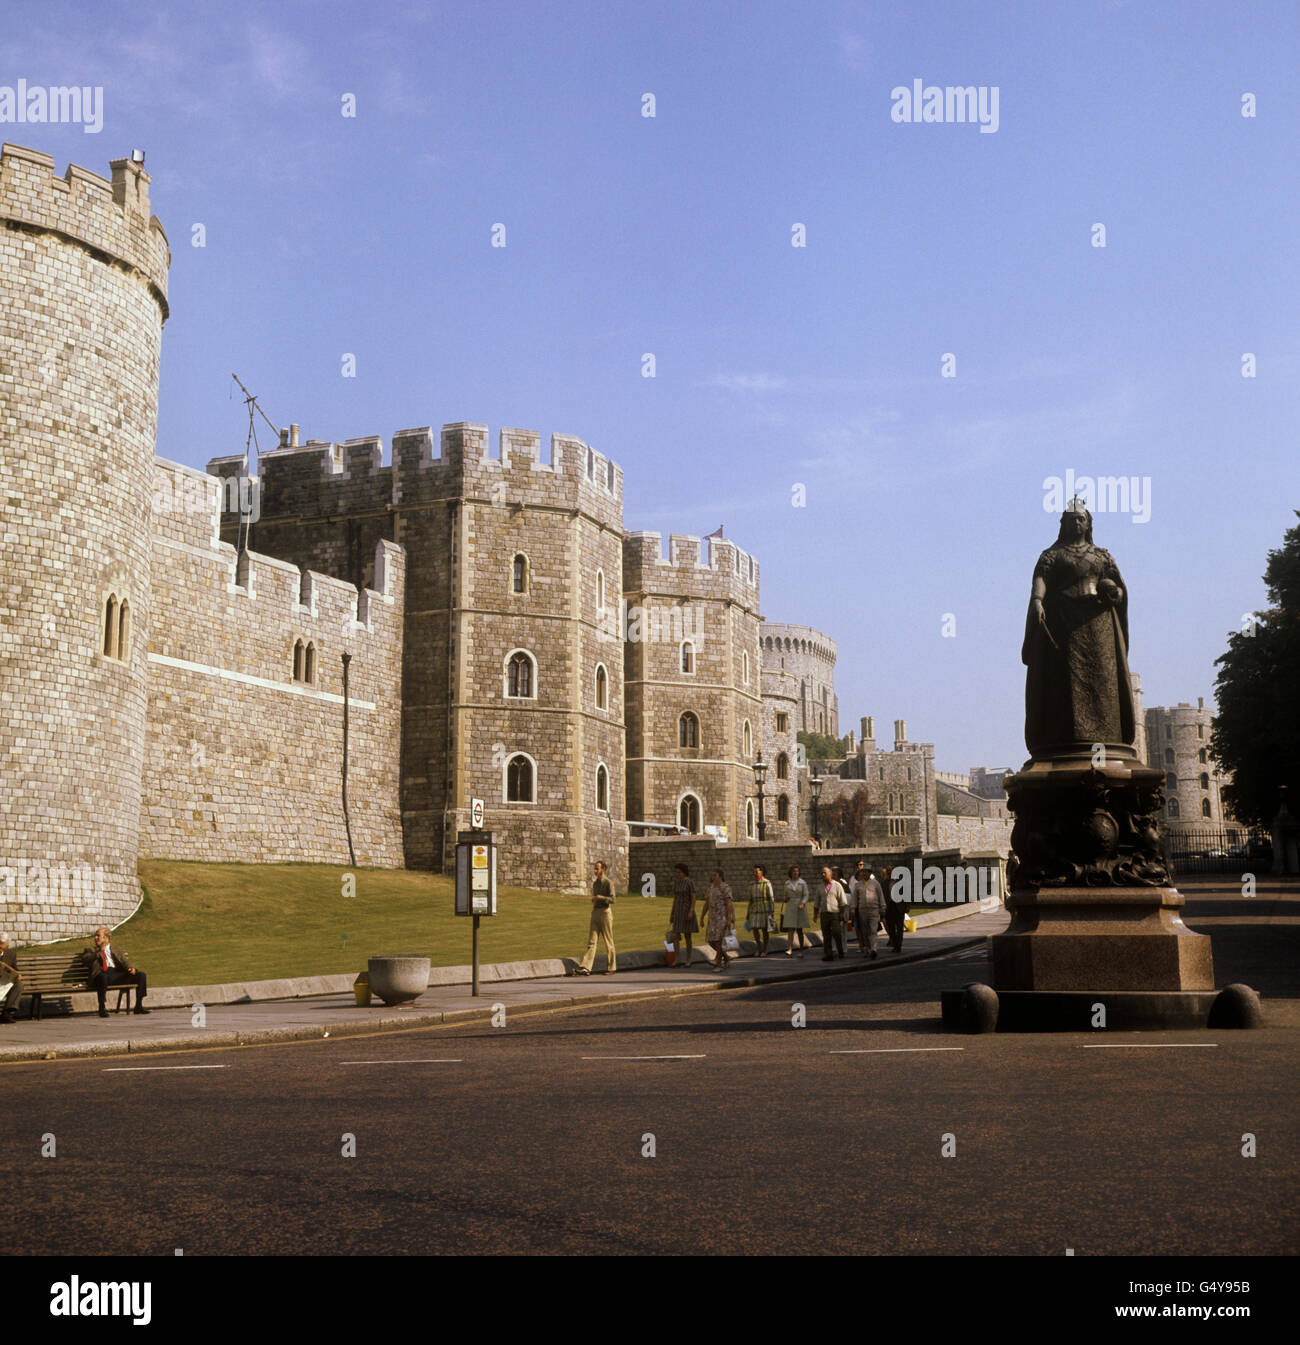 A general view of Windsor Castle and the Sir Edgar Boehm statue of Queen Victoria, which was erected in 1887 in celebration of the queen's Golden Jubilee. Stock Photo